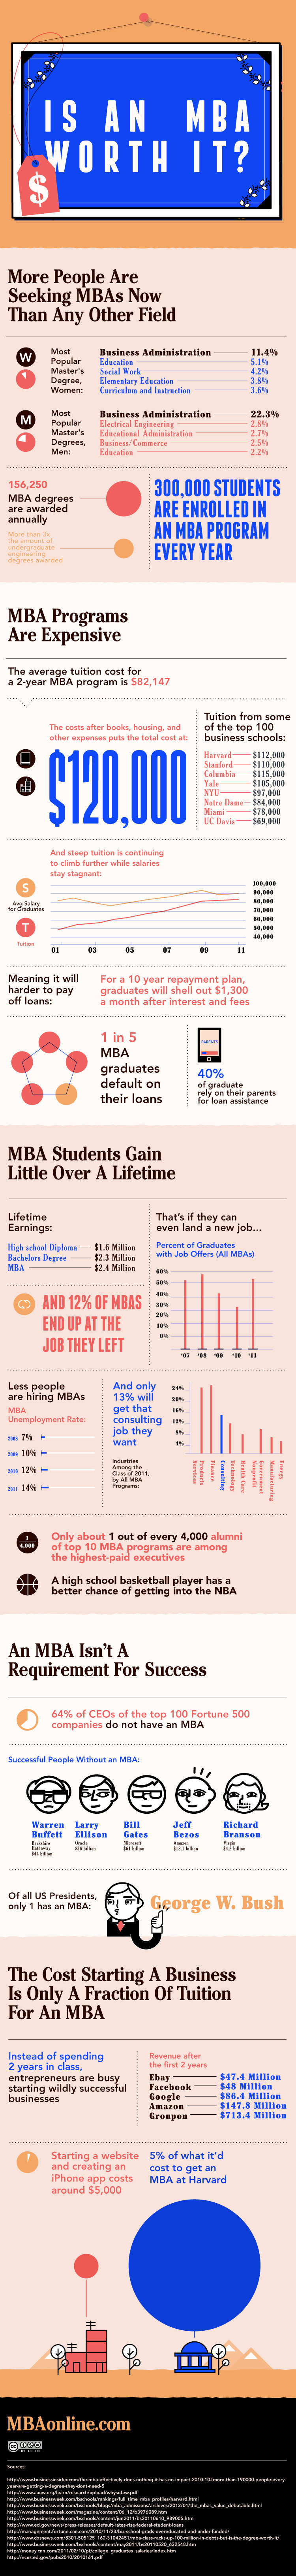 Infographic: The Worth of an MBA